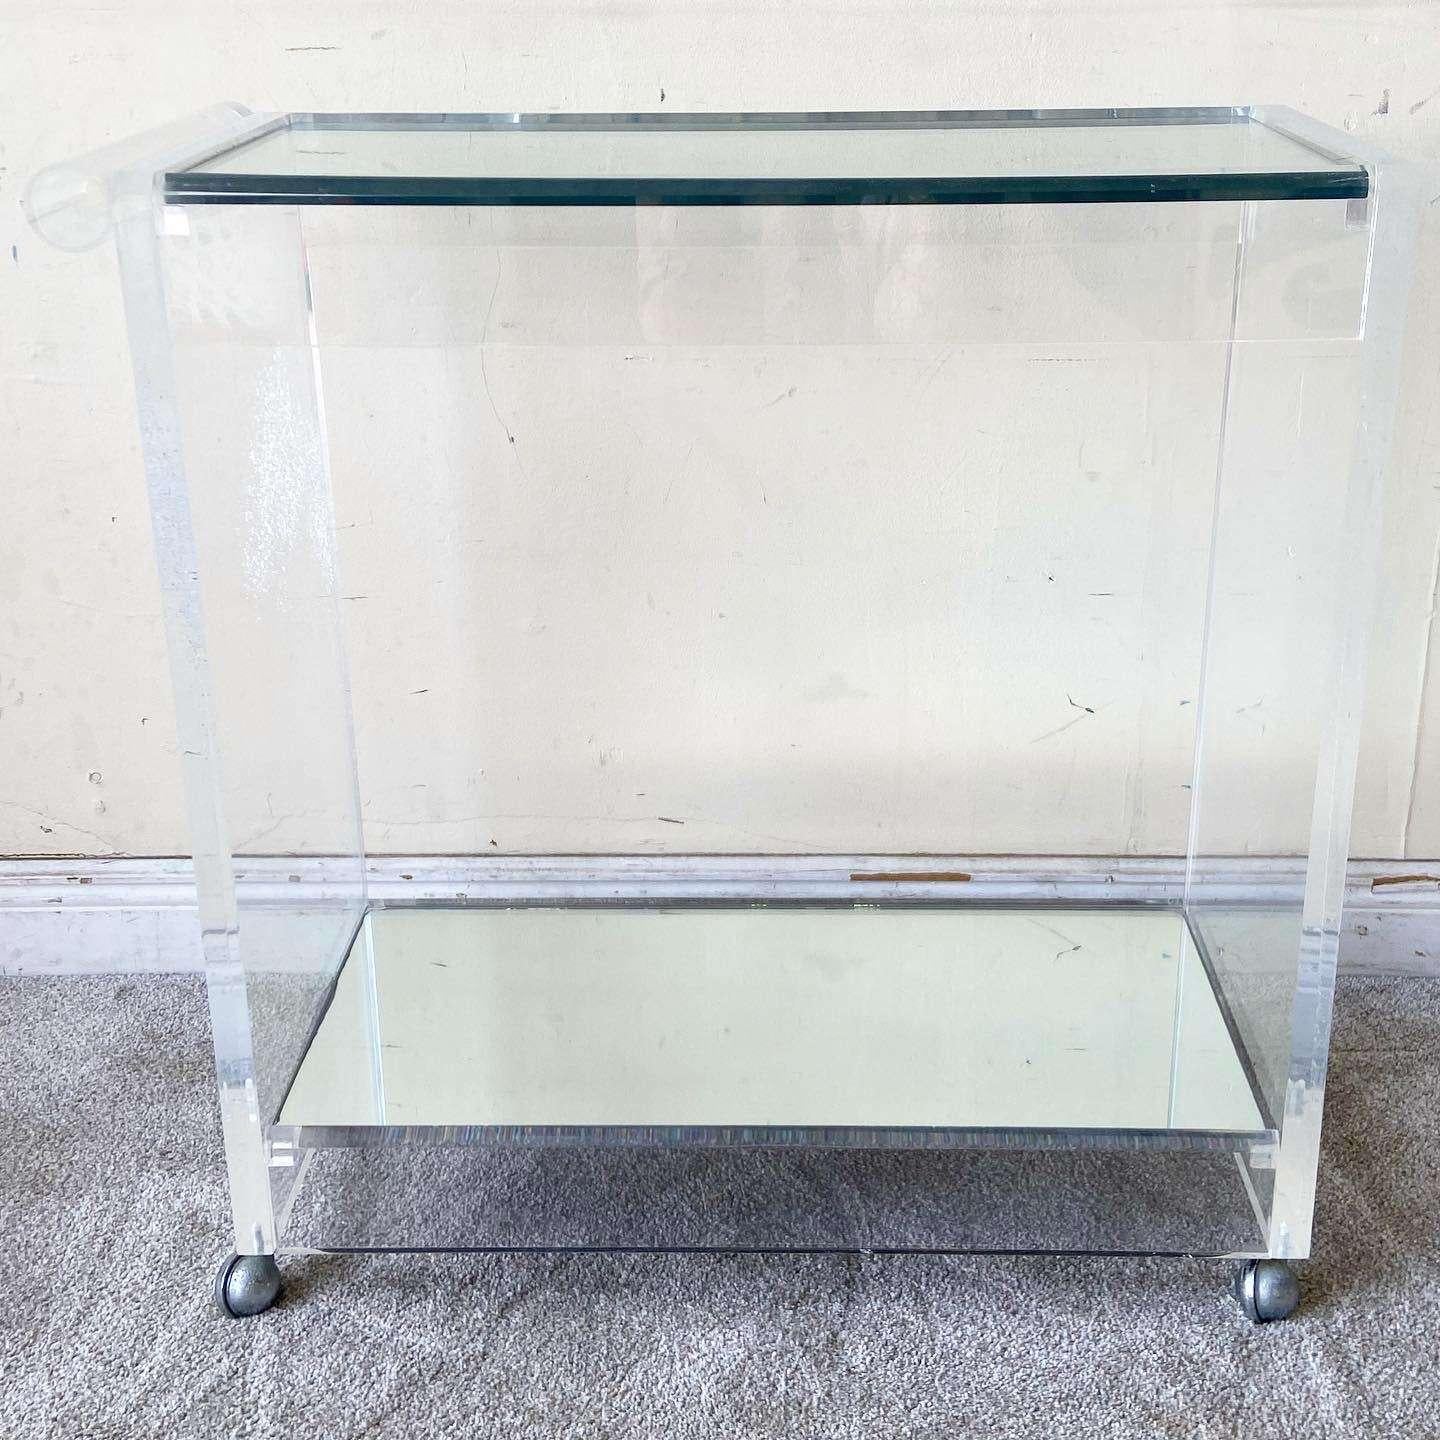 Stunning postmodern lucite bar cart. Features a cylindrical handle with a thick glass top and mirrored bottom shelf.